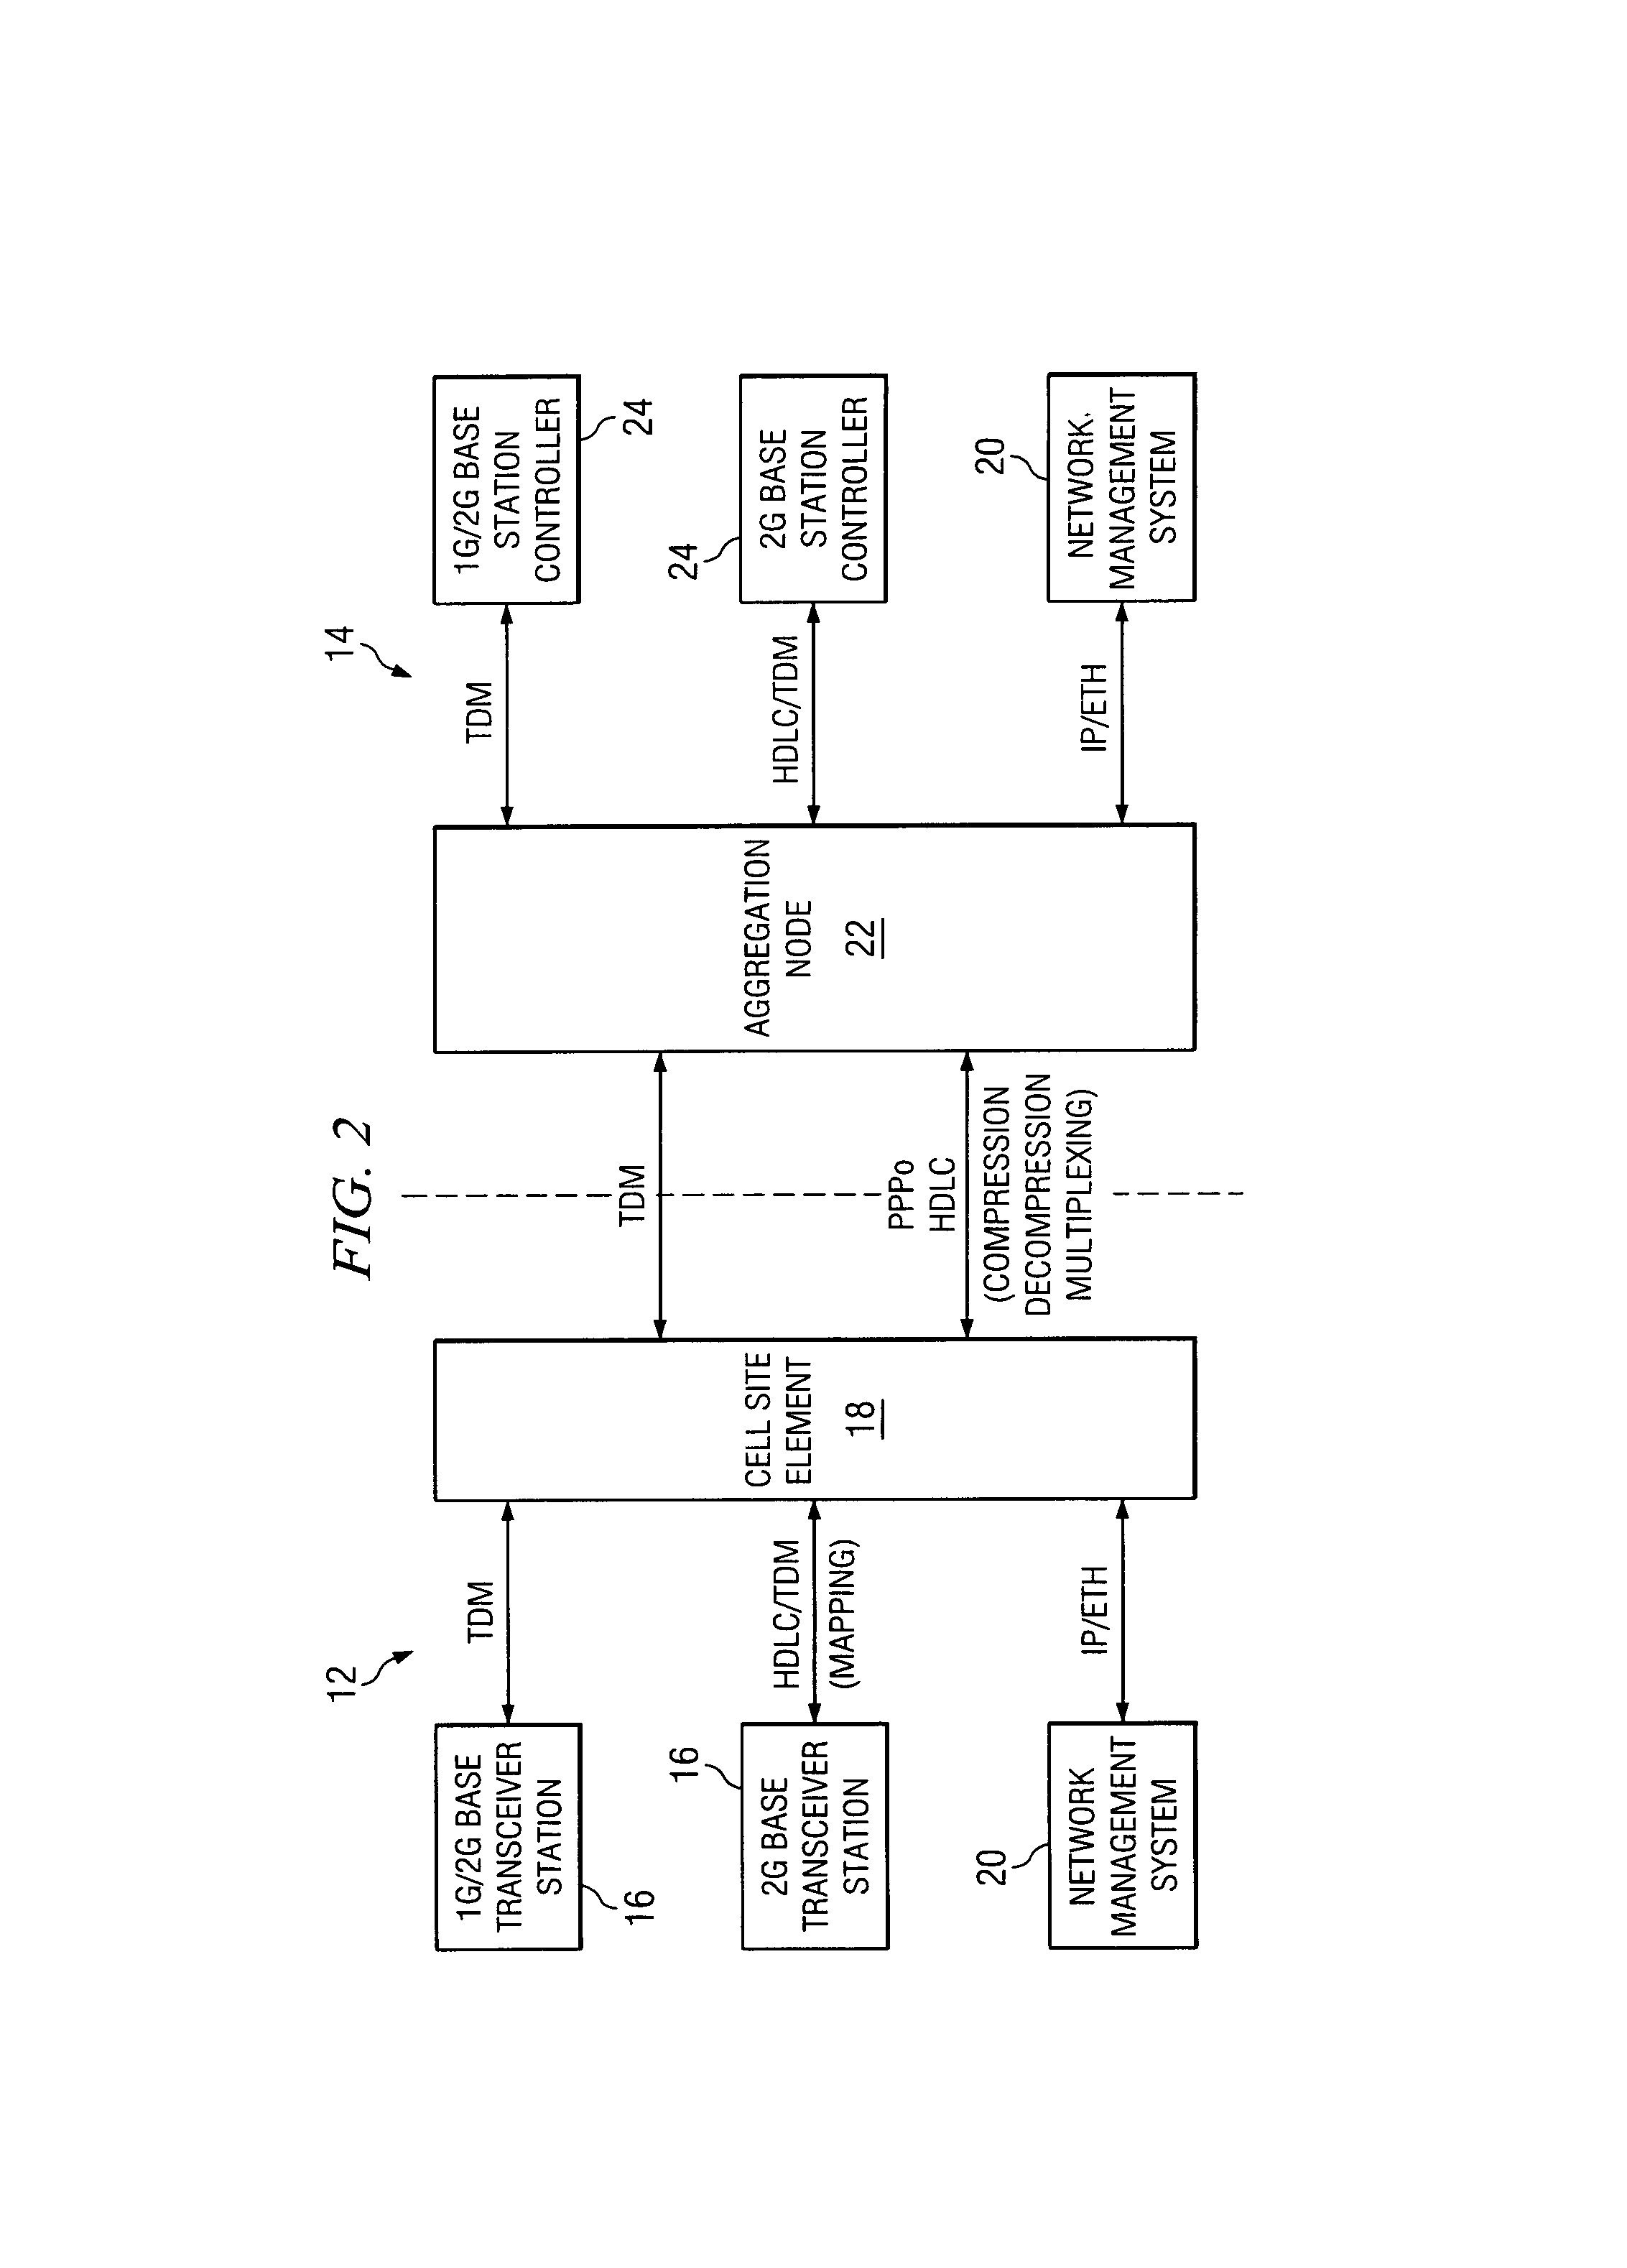 System and method for compressing communication flows in a network environment